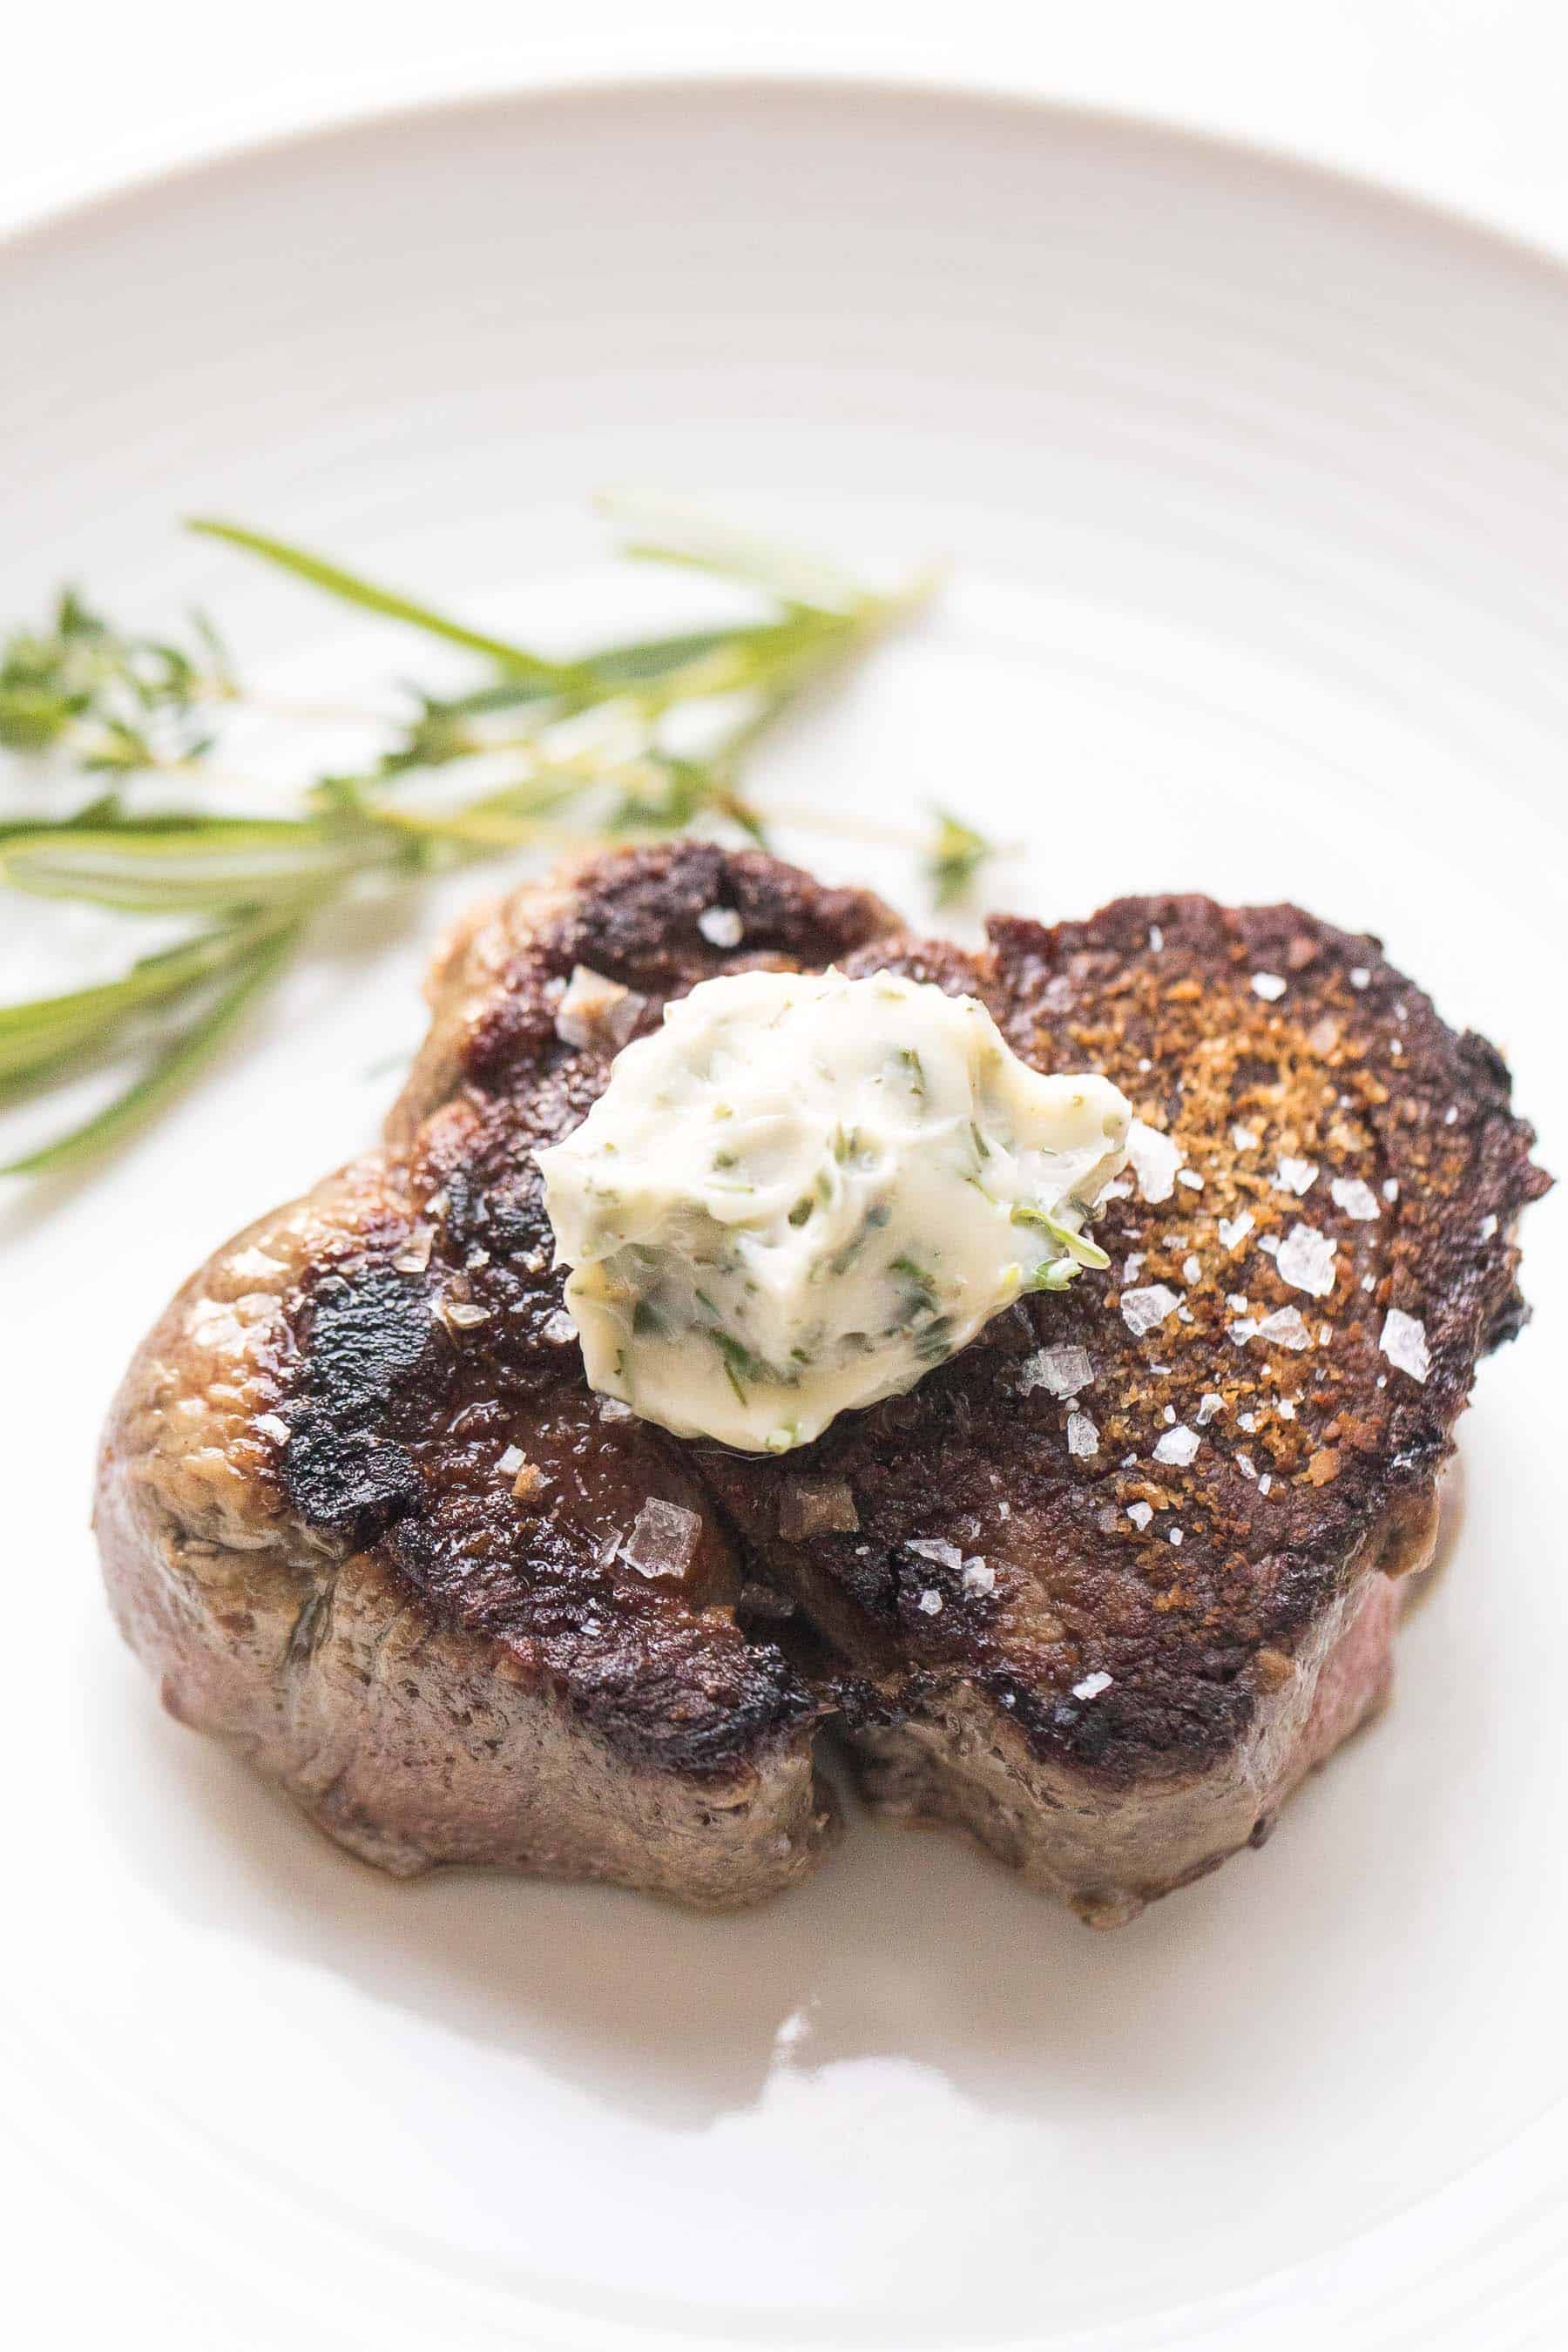 Filet mignon topped with herb butter on a white plate and white background